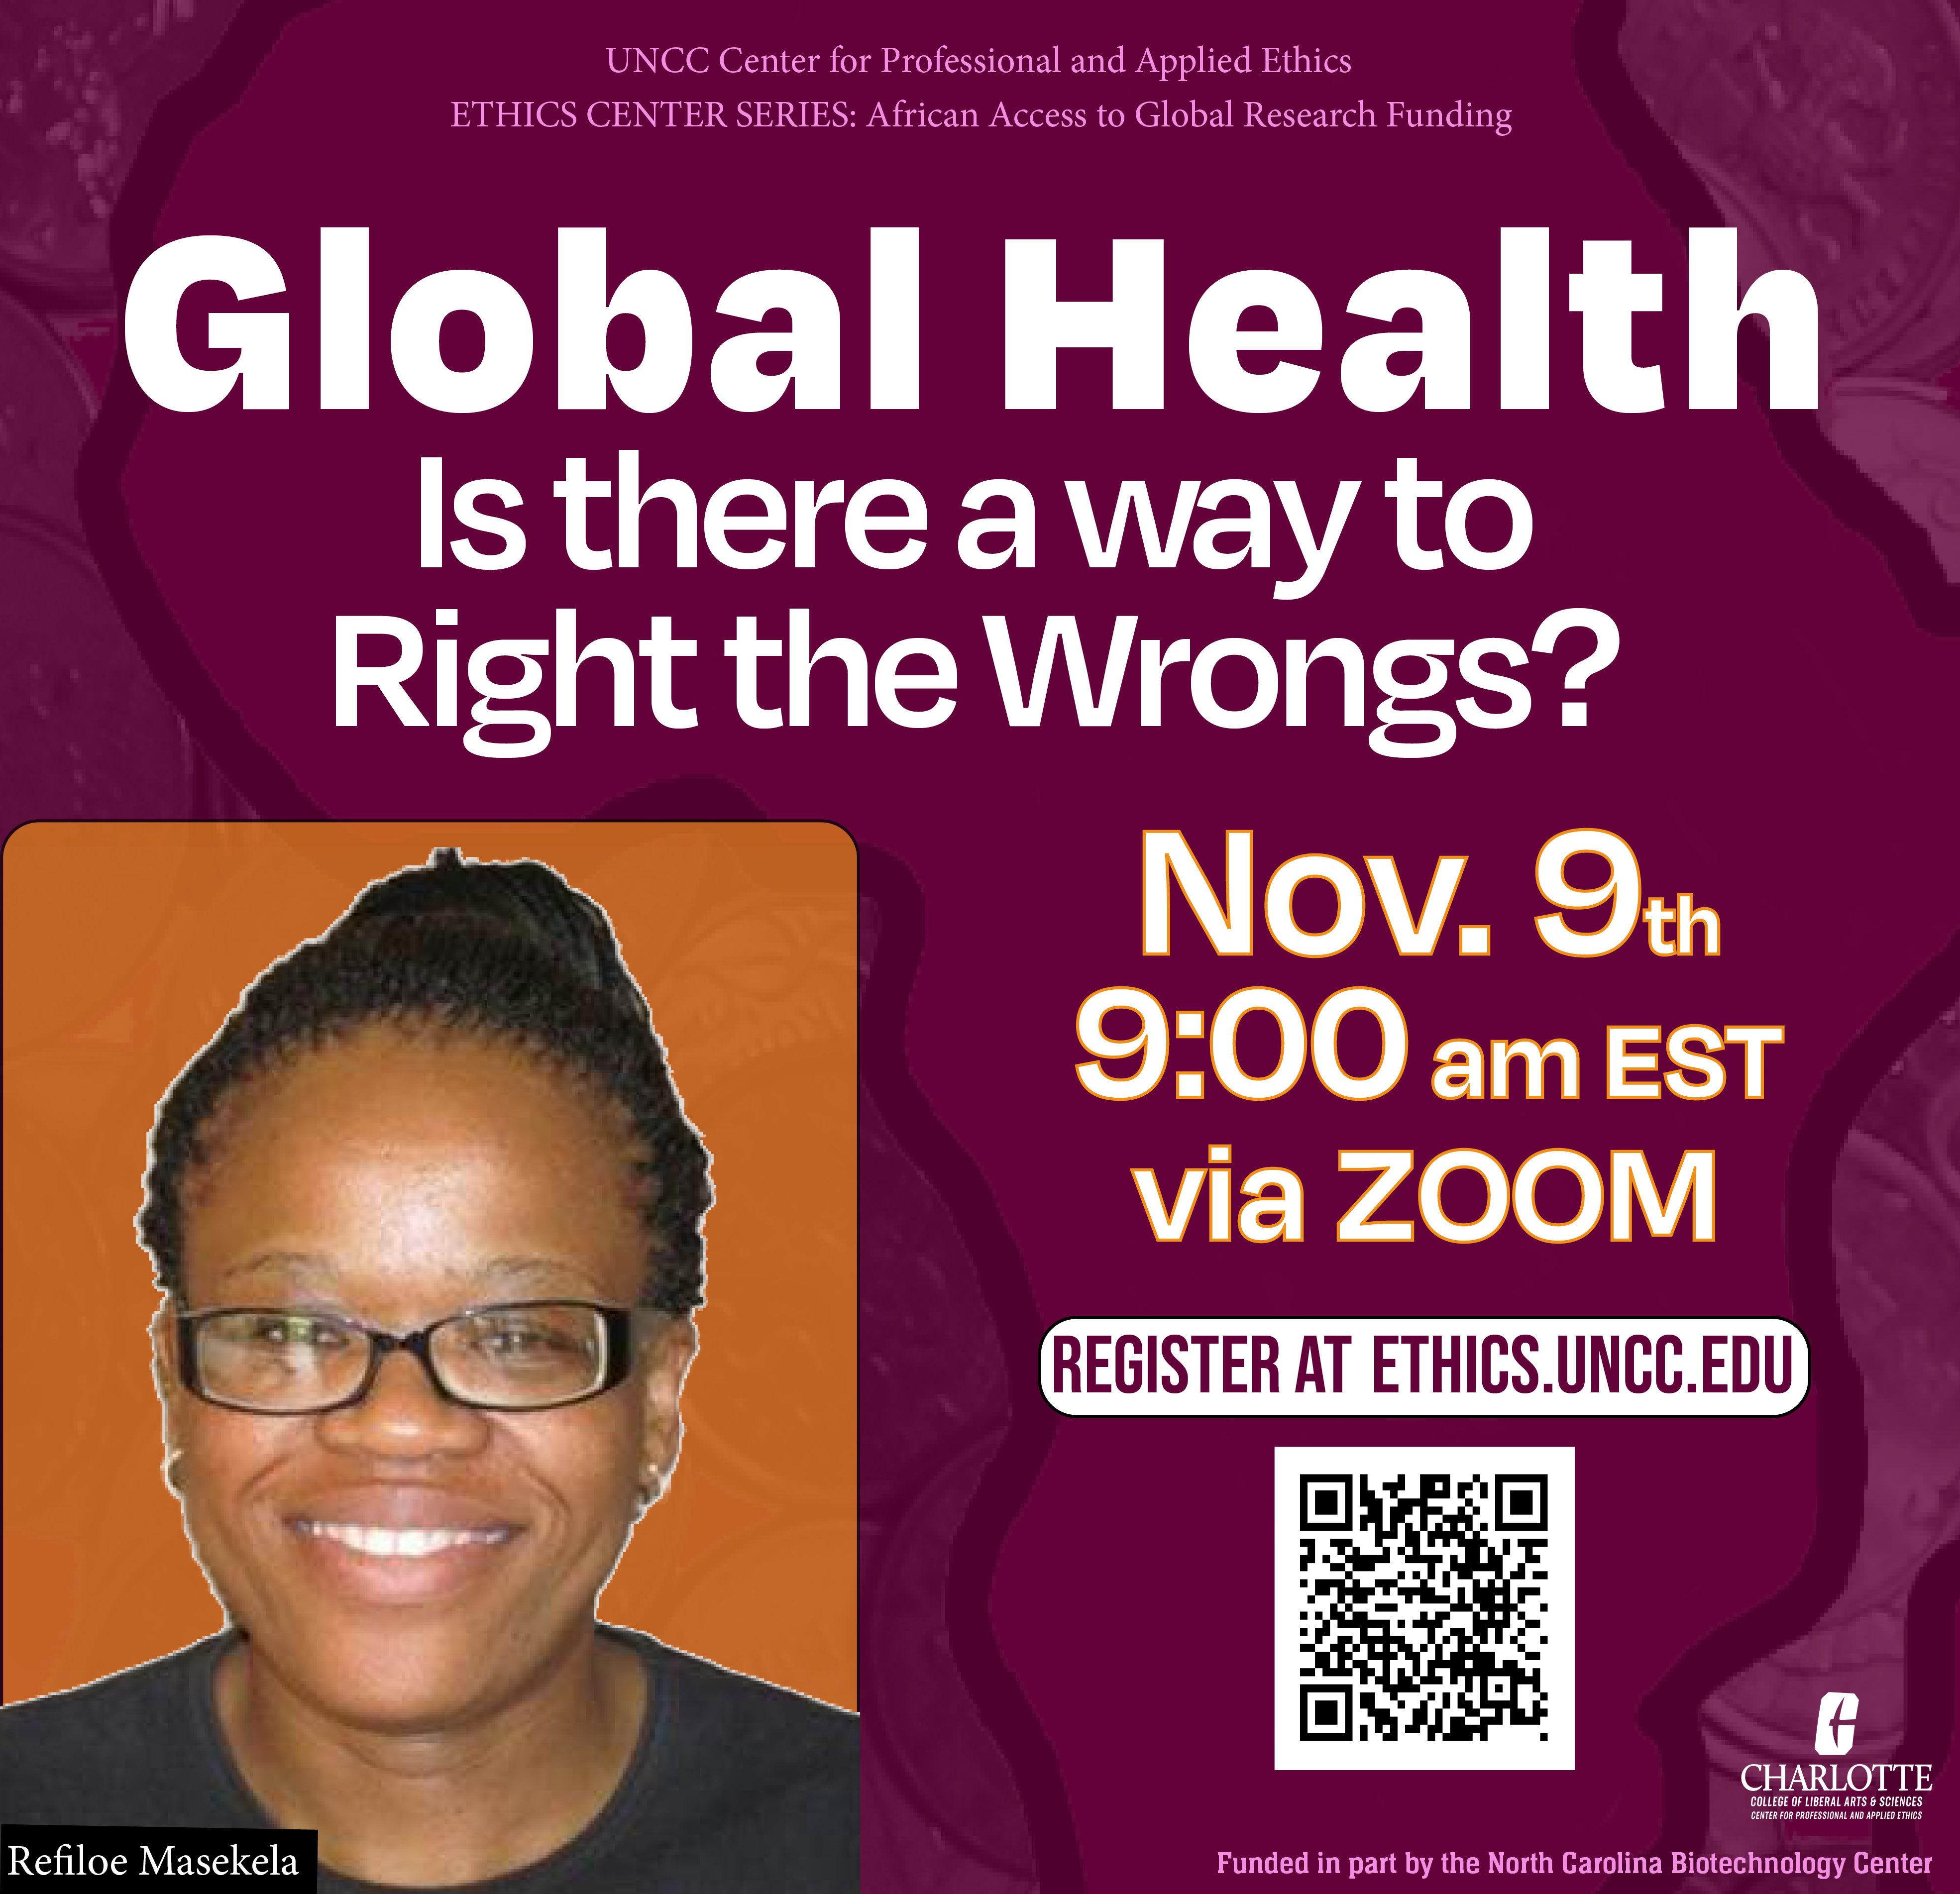 Refiloe Masekela, "Global health: is there a way to right the wrongs?"